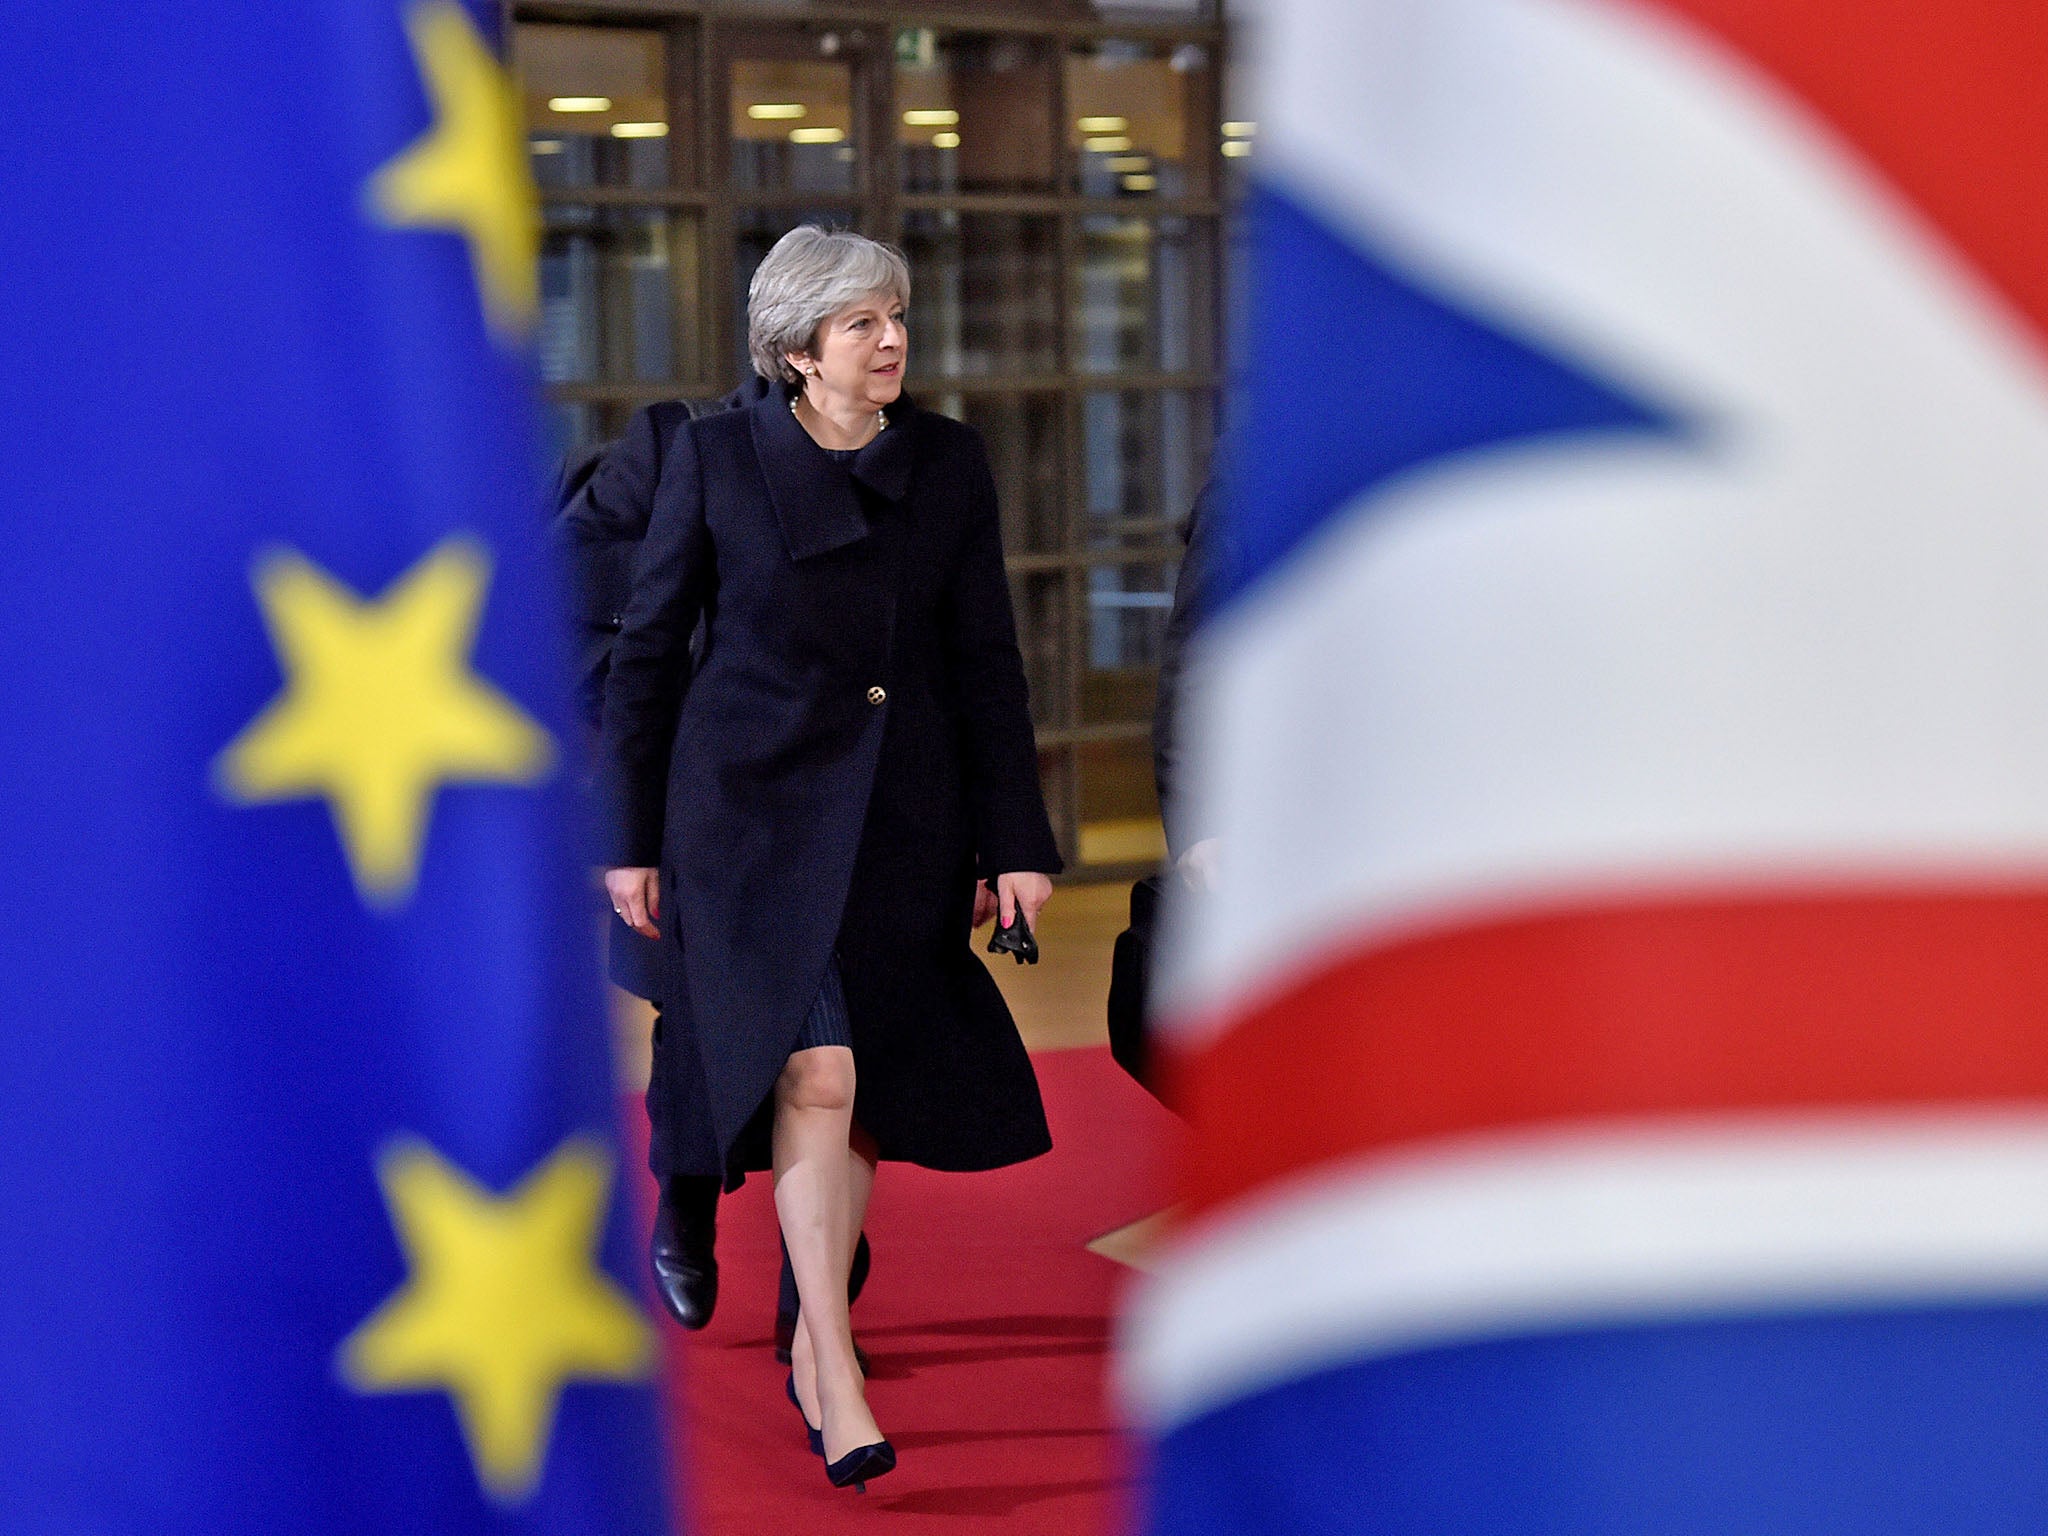 EU leaders fear the PM will be replaced by an aggressive Eurosceptic